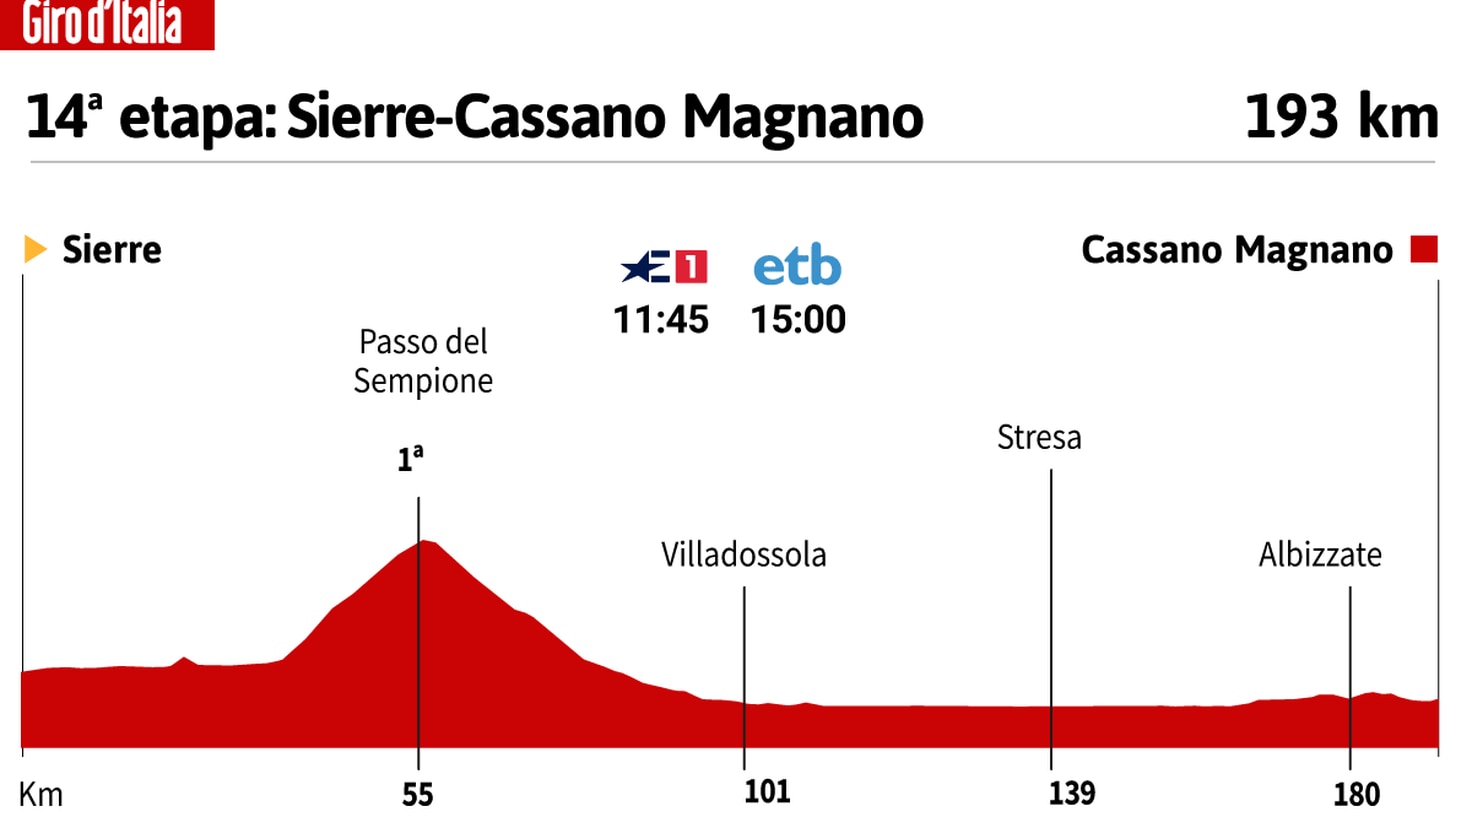 Giro d'Italia today, stage 14: schedule, profile and route
